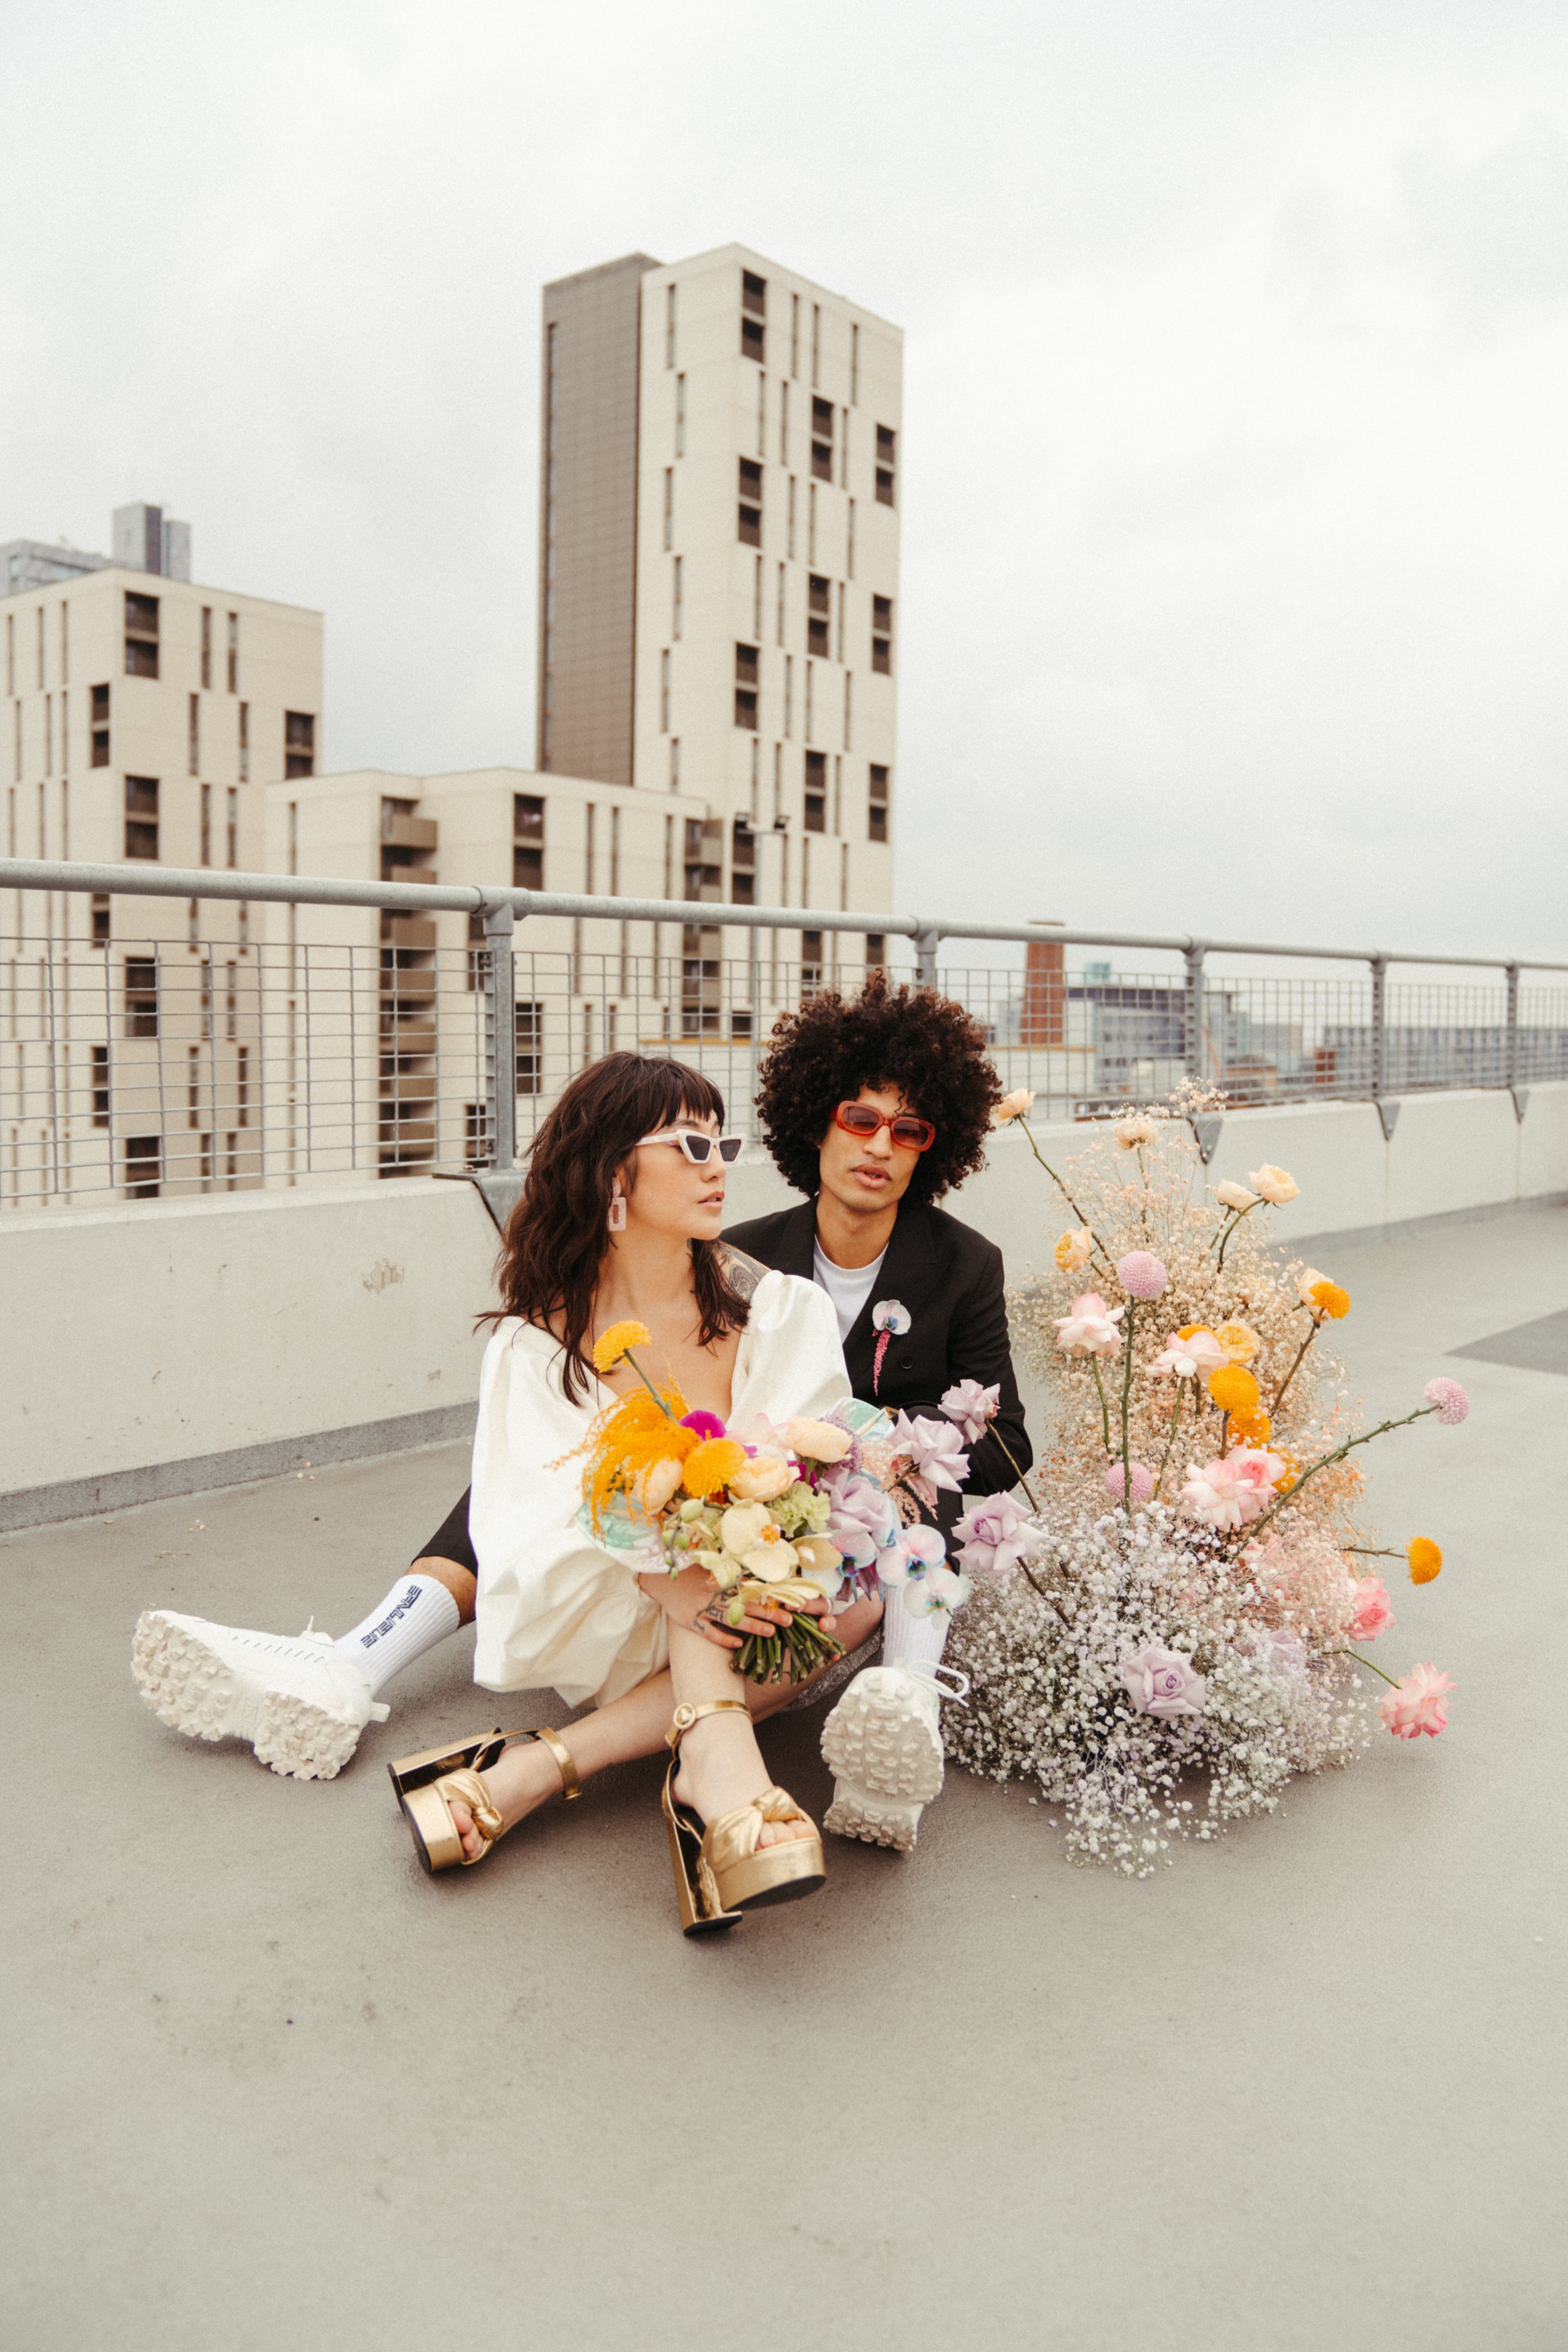  The bride and groom are sat on the floor next to each other on the top floor of an empty car park. Behind them are tall concrete buildings.   The bride is wearing a short white wedding dress with long voluminous sleeves, gold platform, open toed san